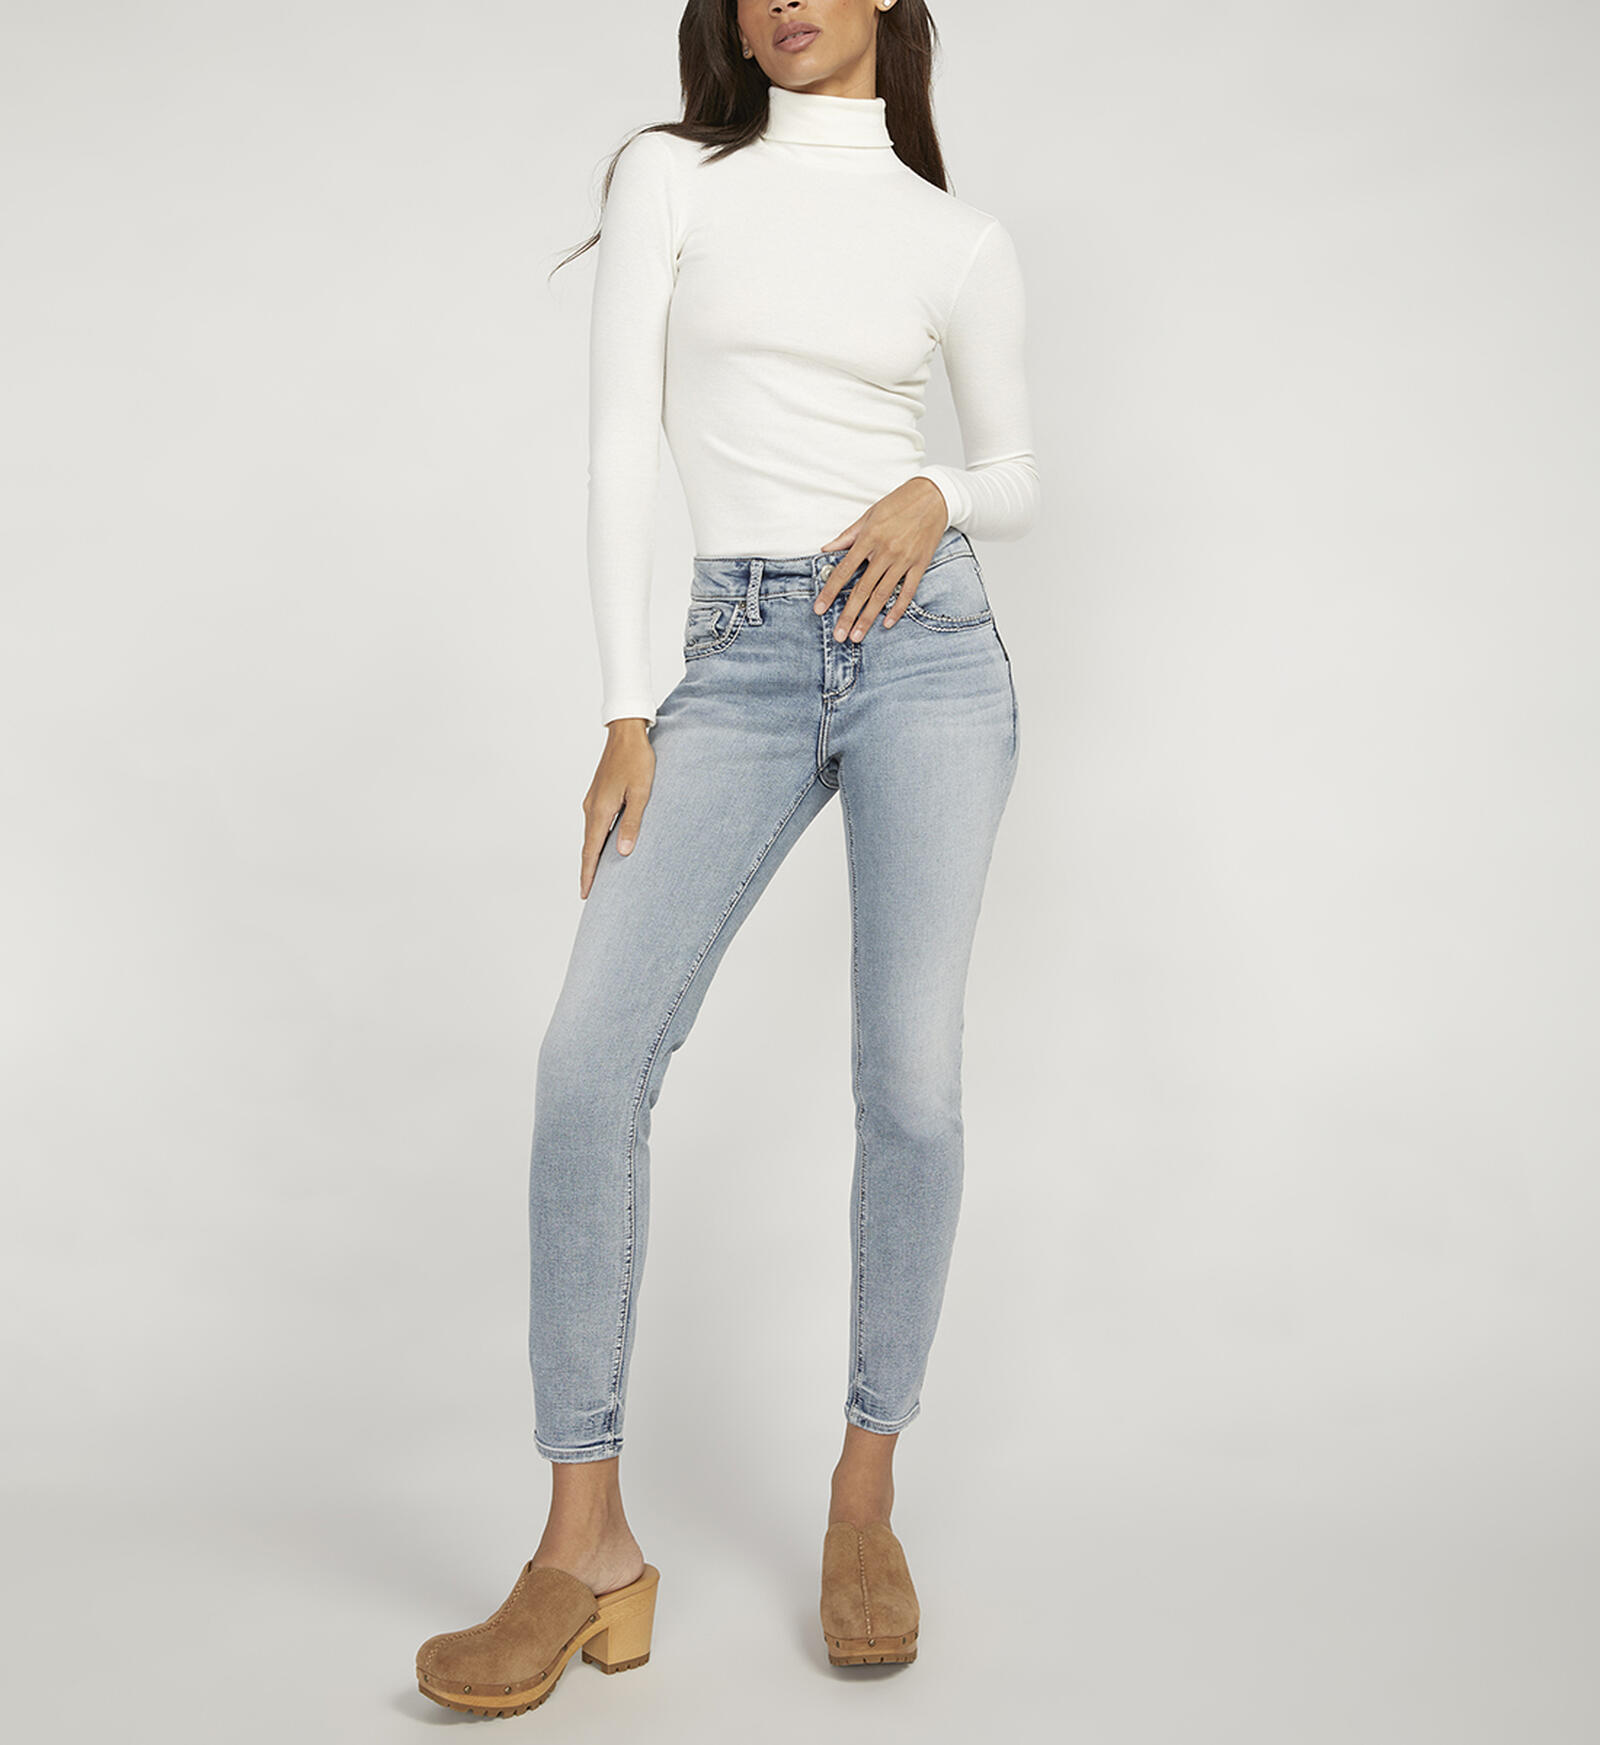 Buy Elyse Mid Rise Skinny Jeans for USD 94.00 | Silver Jeans US New